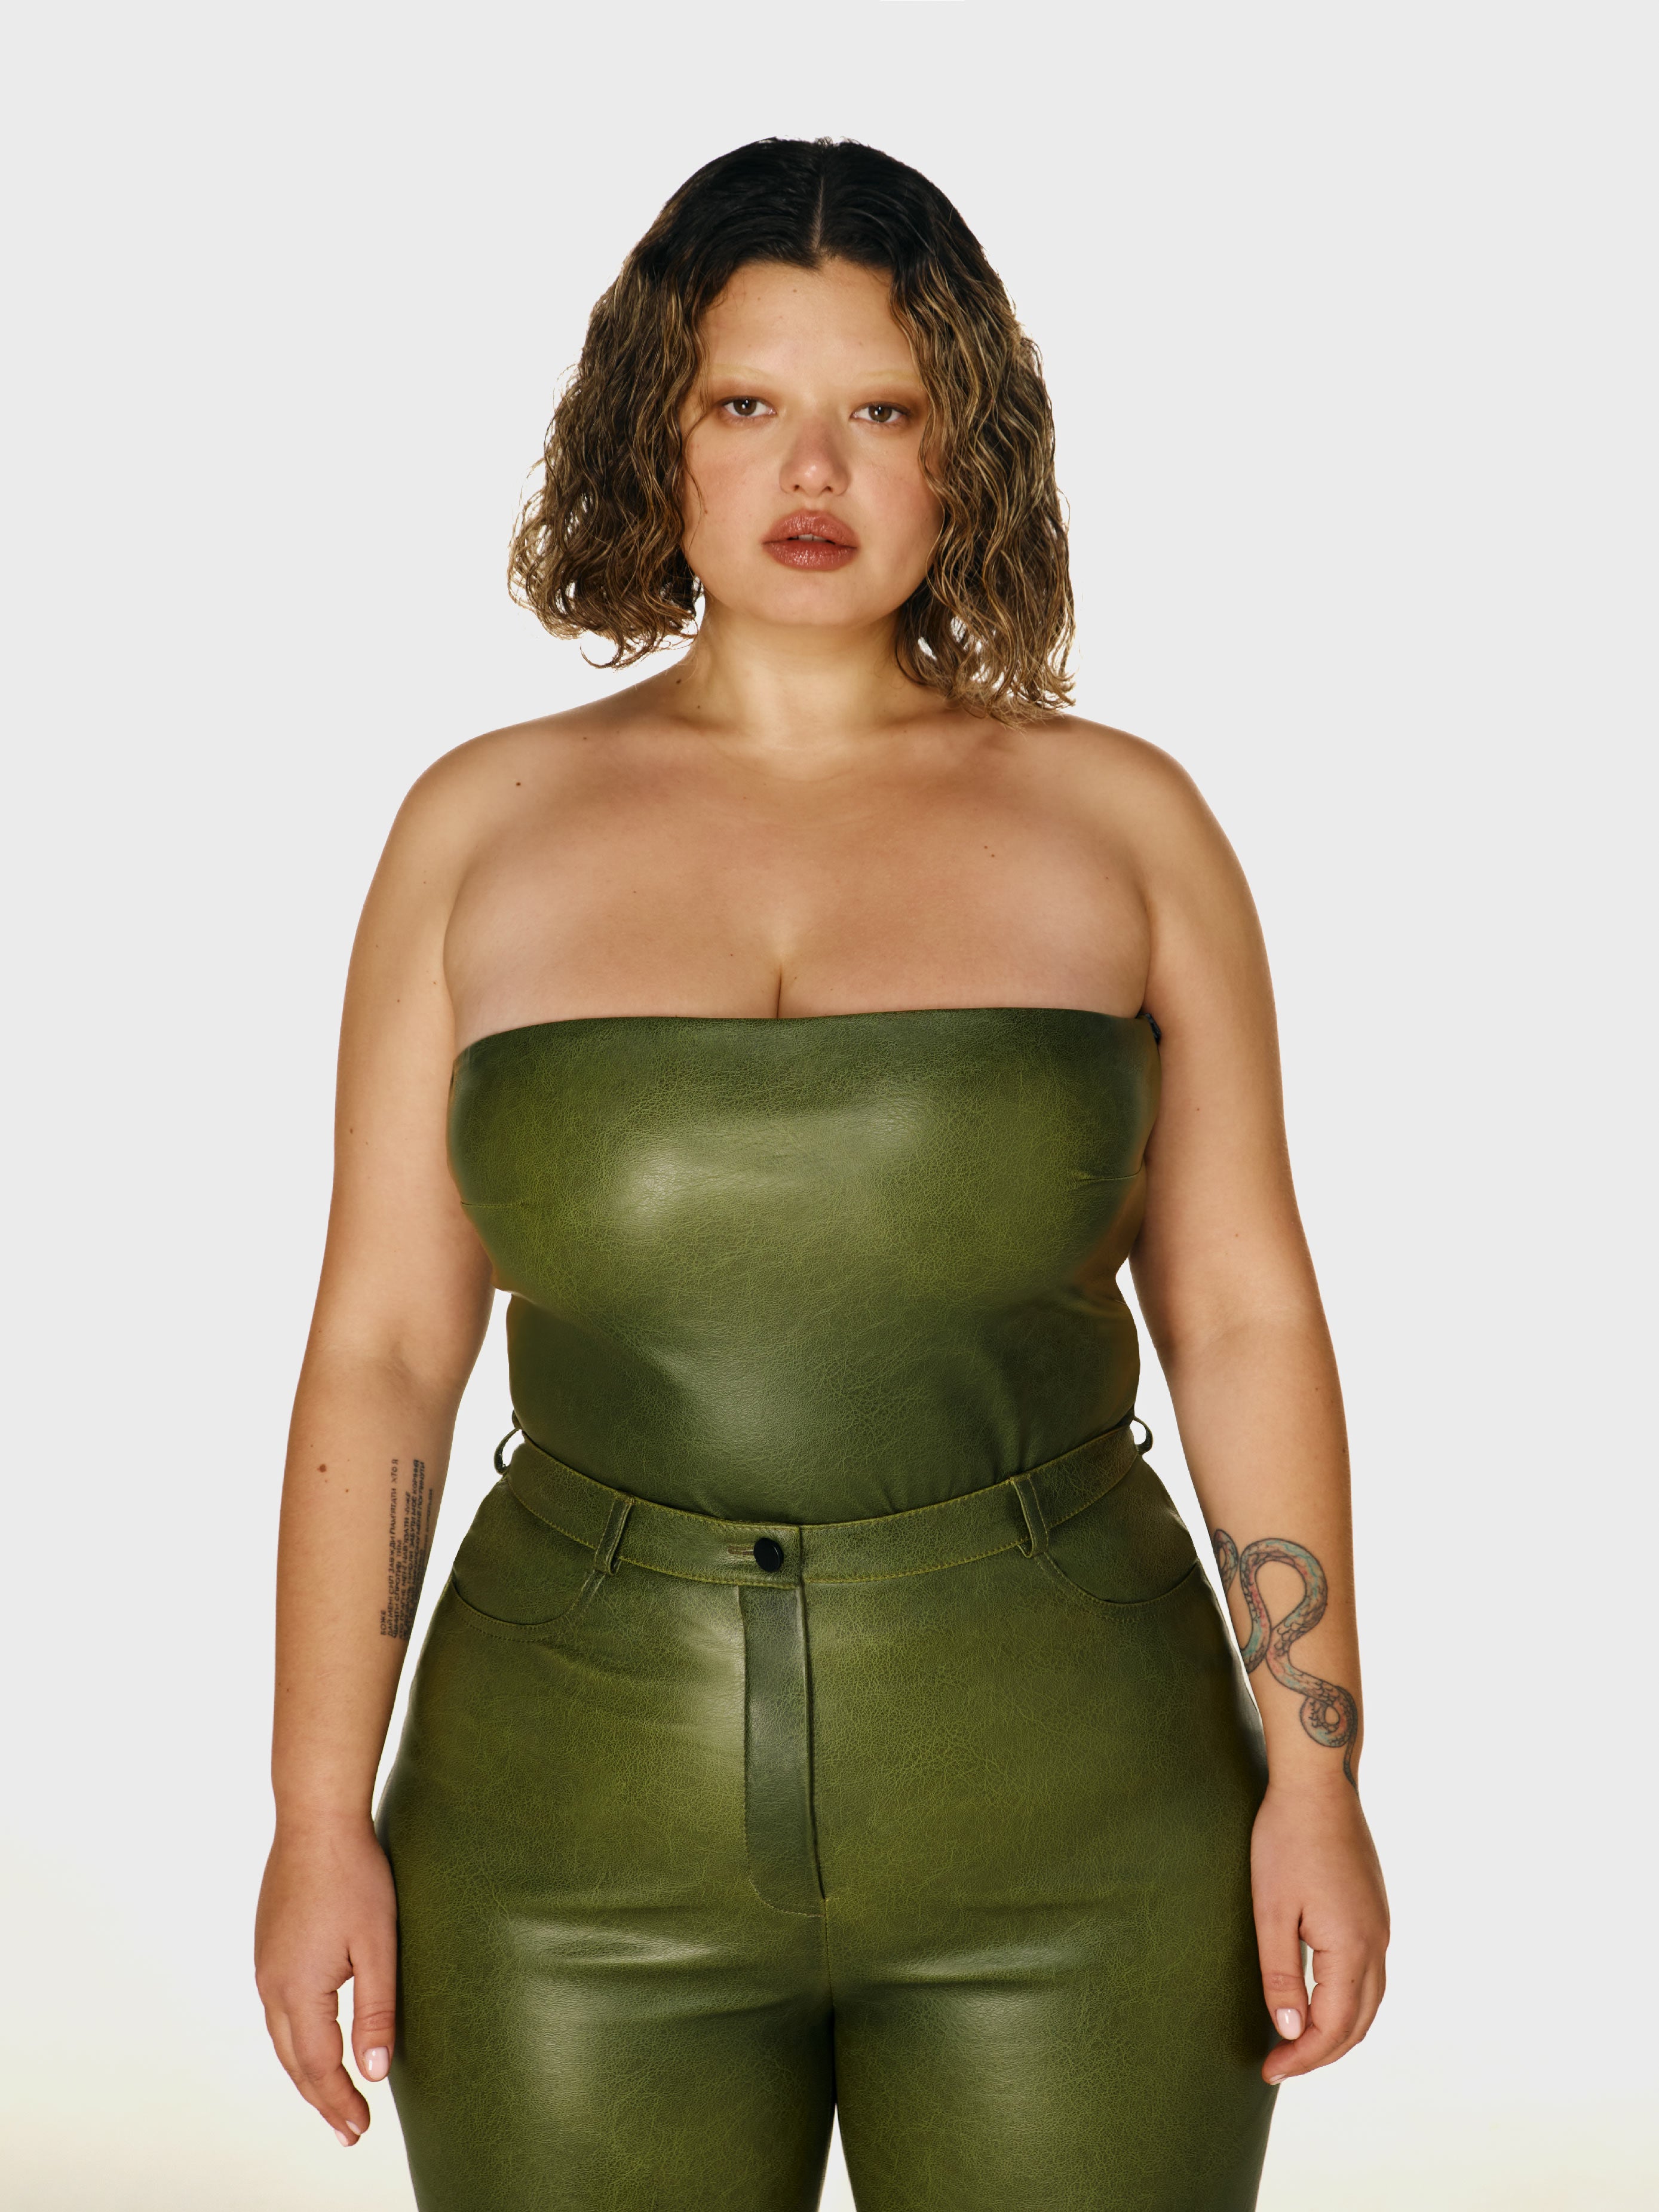 Cowboy shot of a girl in a green vegan leather tube top and green vegan leather pants with straight leg